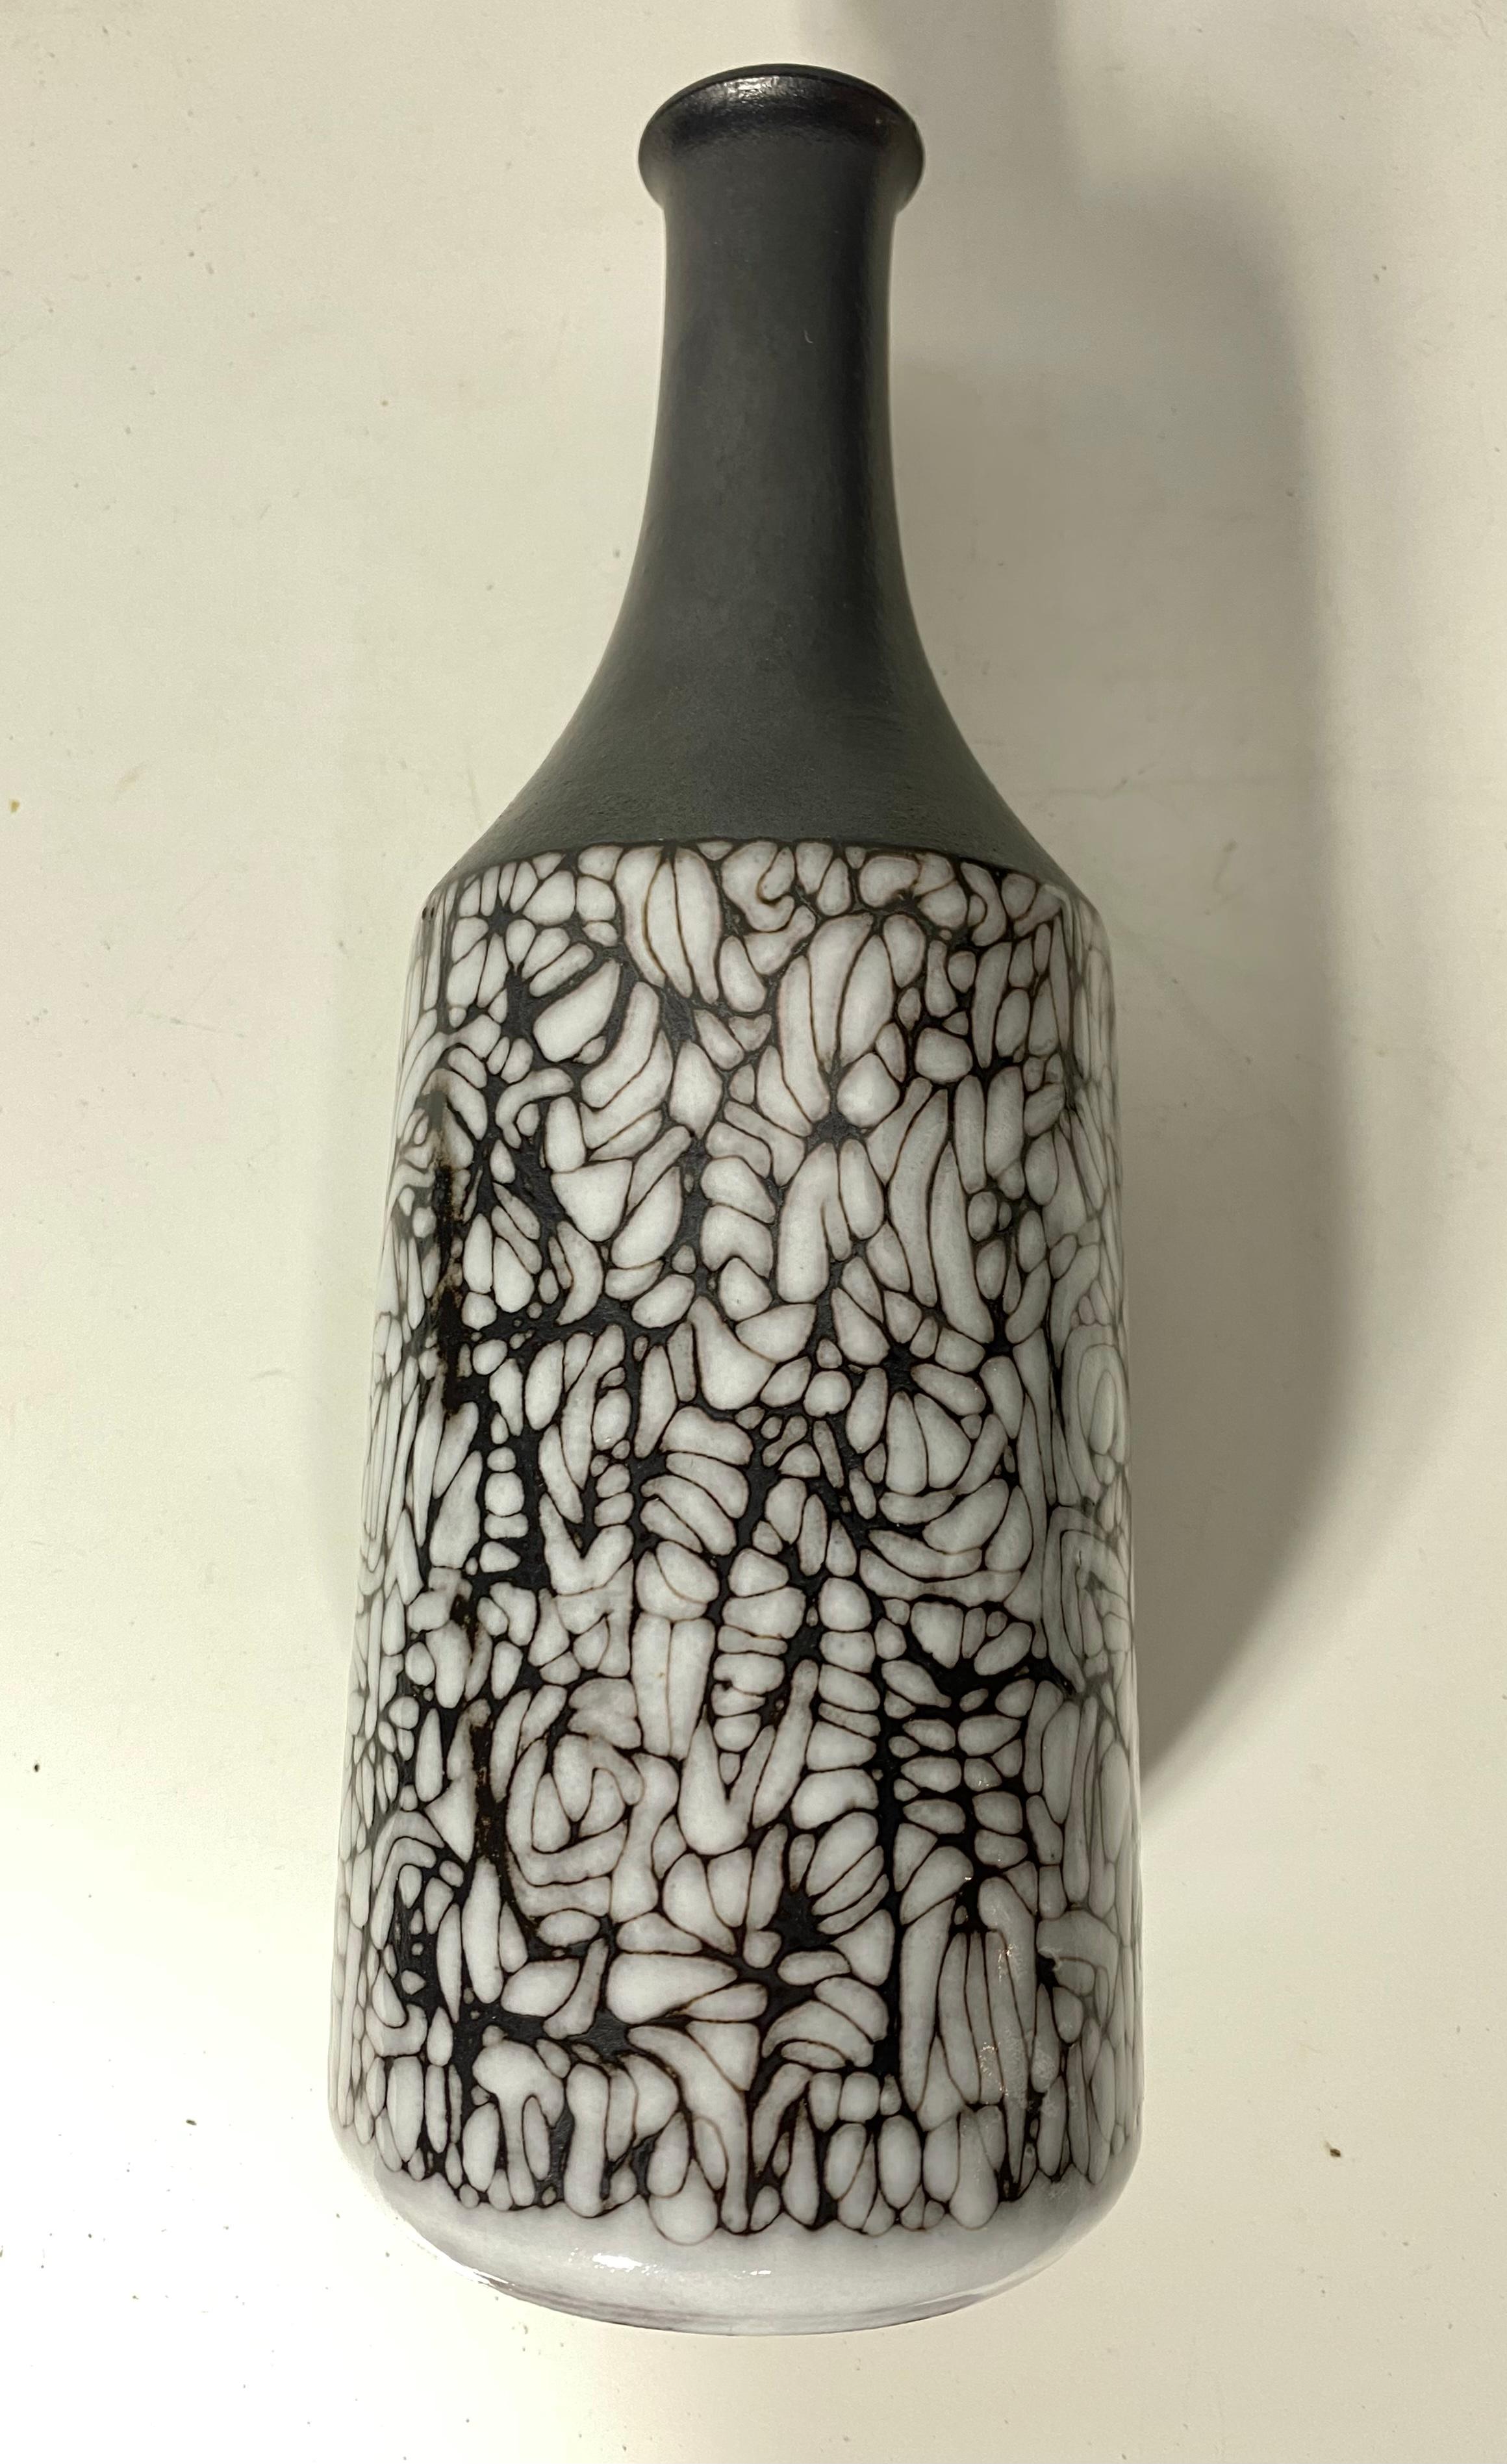  Studio Ceramic Vase from G. Lang for Wilhelm & Elly Kuch, 1960s, Germany For Sale 1